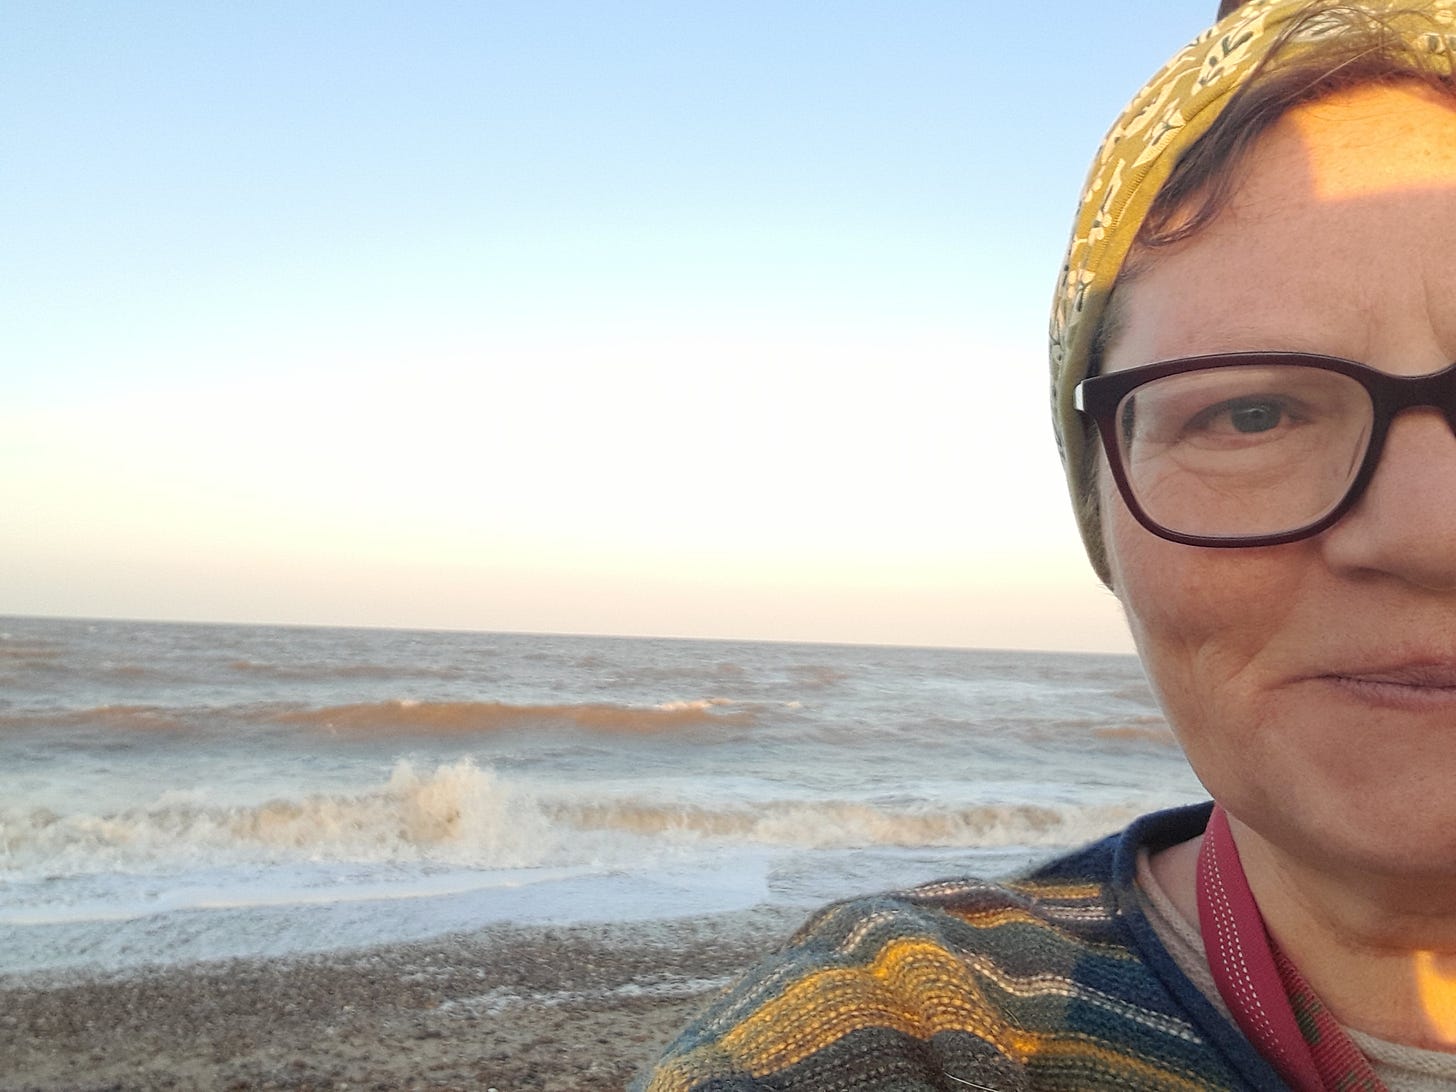 Selfie - half my face, wearing red specs. Dog leads round my neck. Stripy jumper. Green headband.  The sea's behind me